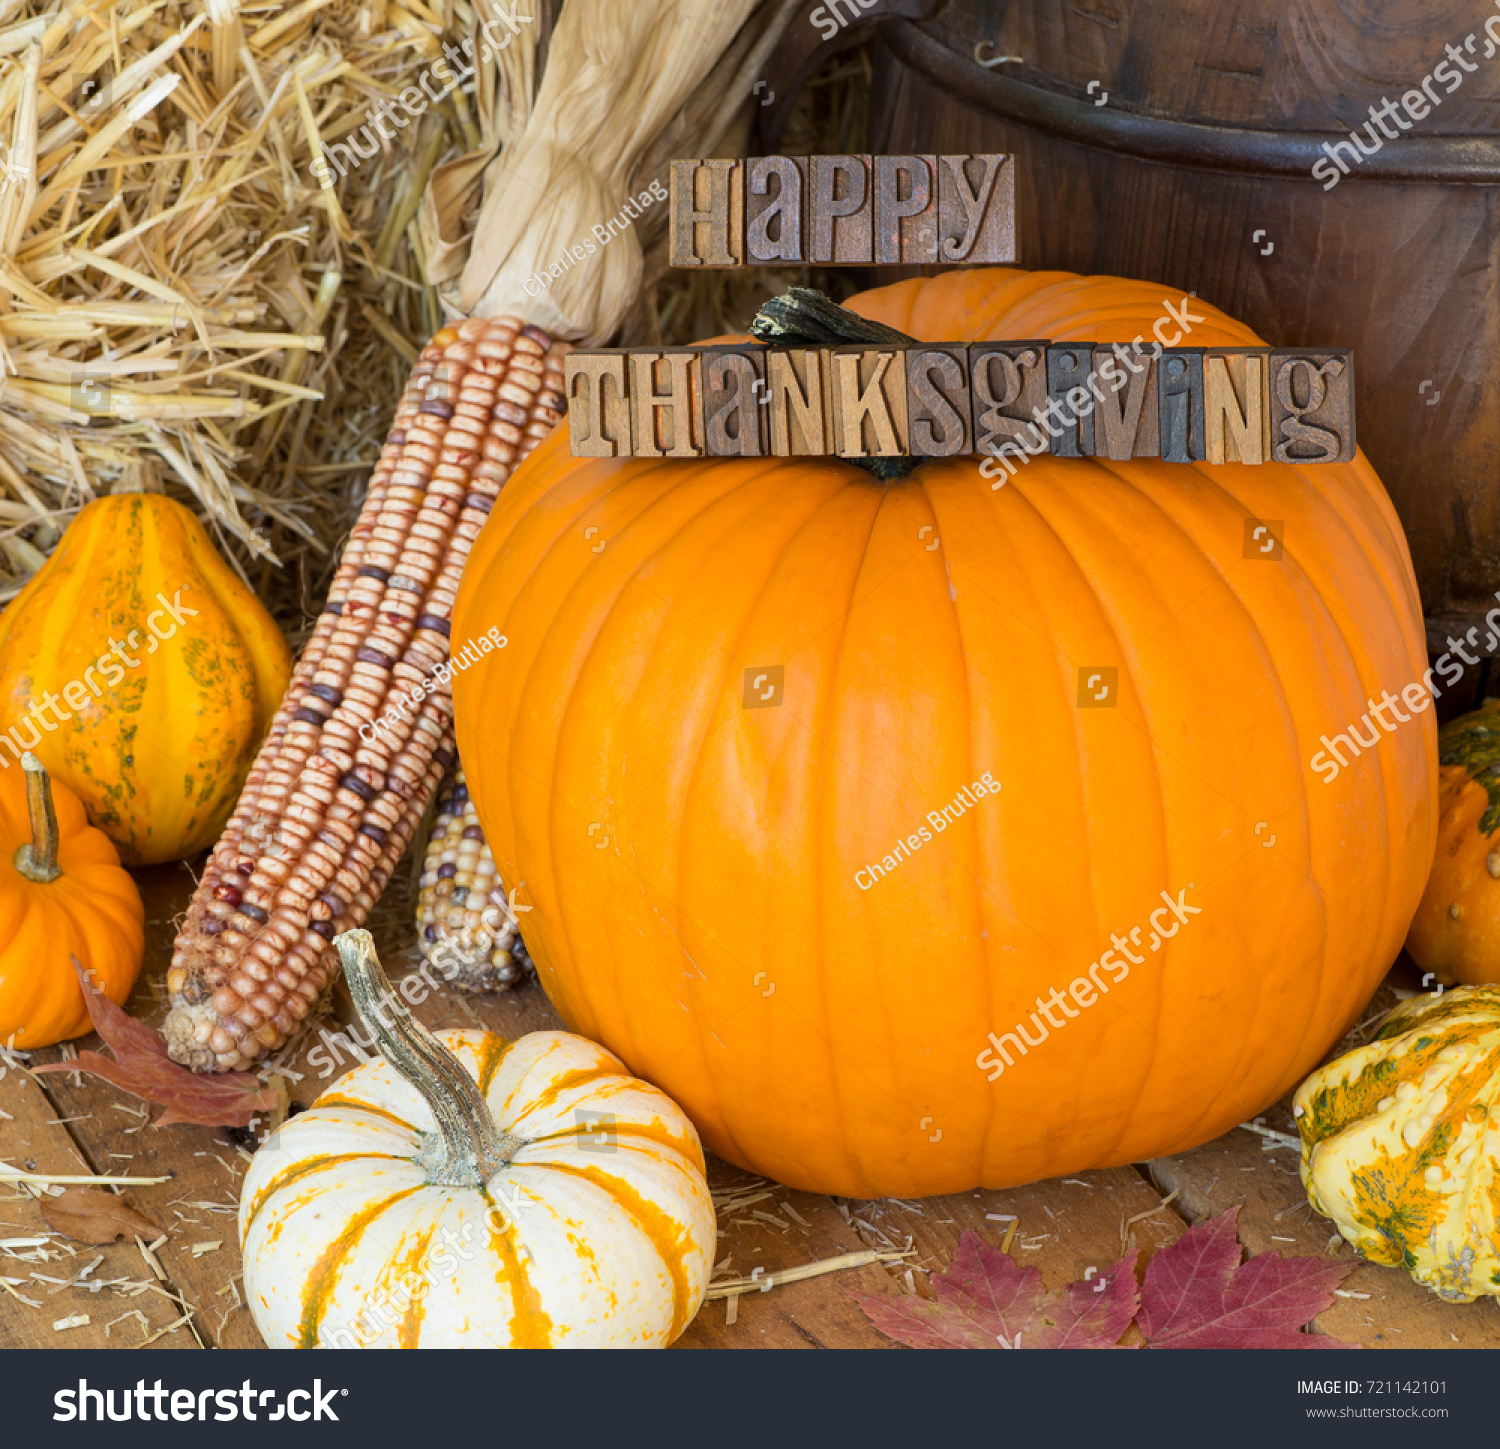 Colorful Pumpkins Gourds Corn On Wooden Stock Photo (Royalty Free ...